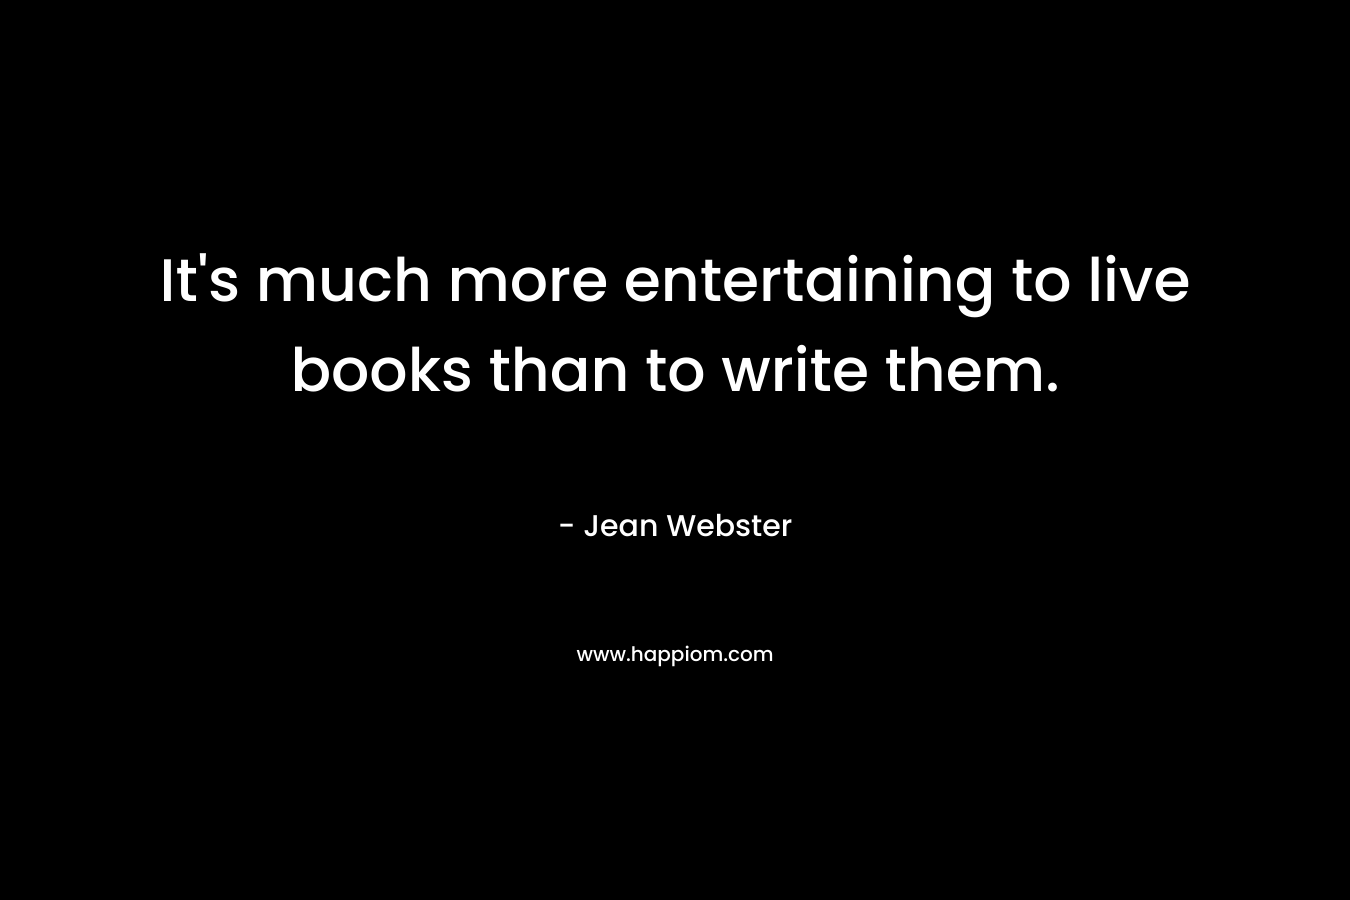 It’s much more entertaining to live books than to write them. – Jean Webster